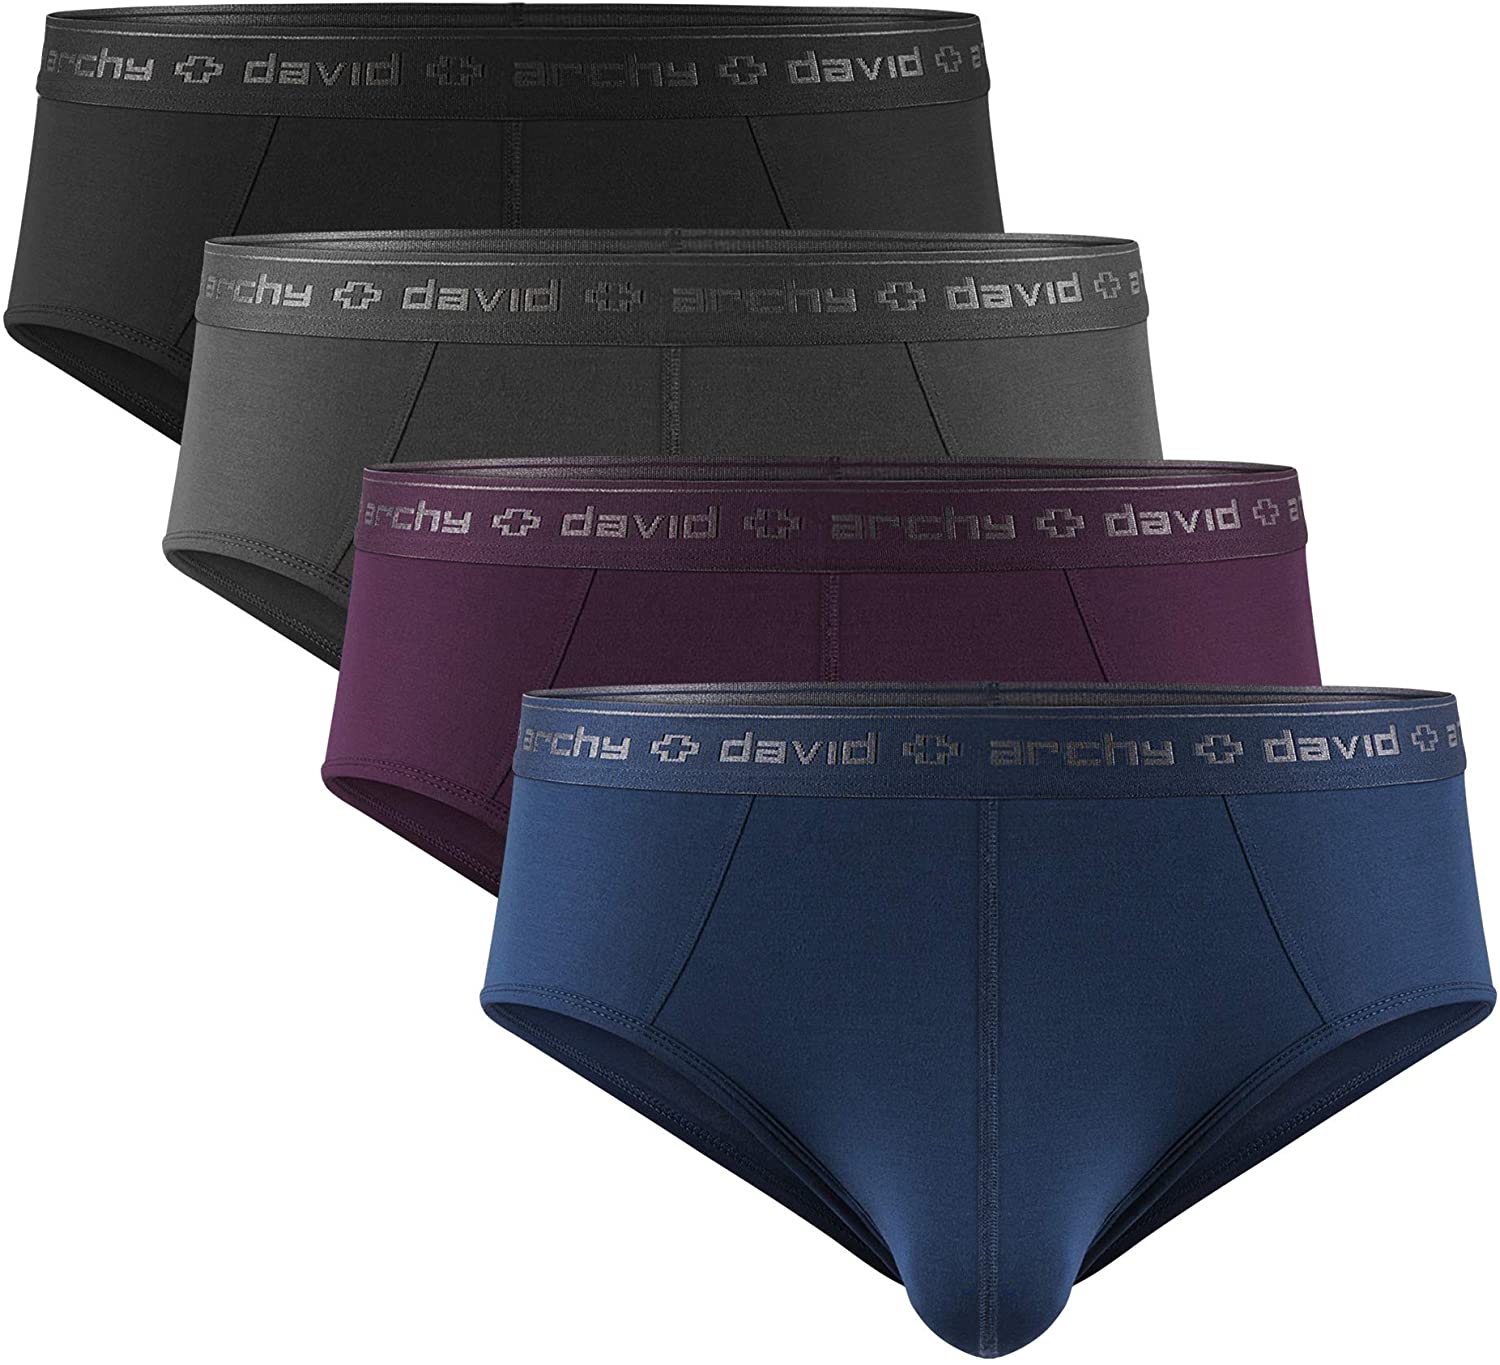  DAVID ARCHY Mens 4 Pack Micro Modal Separate Pouch Briefs